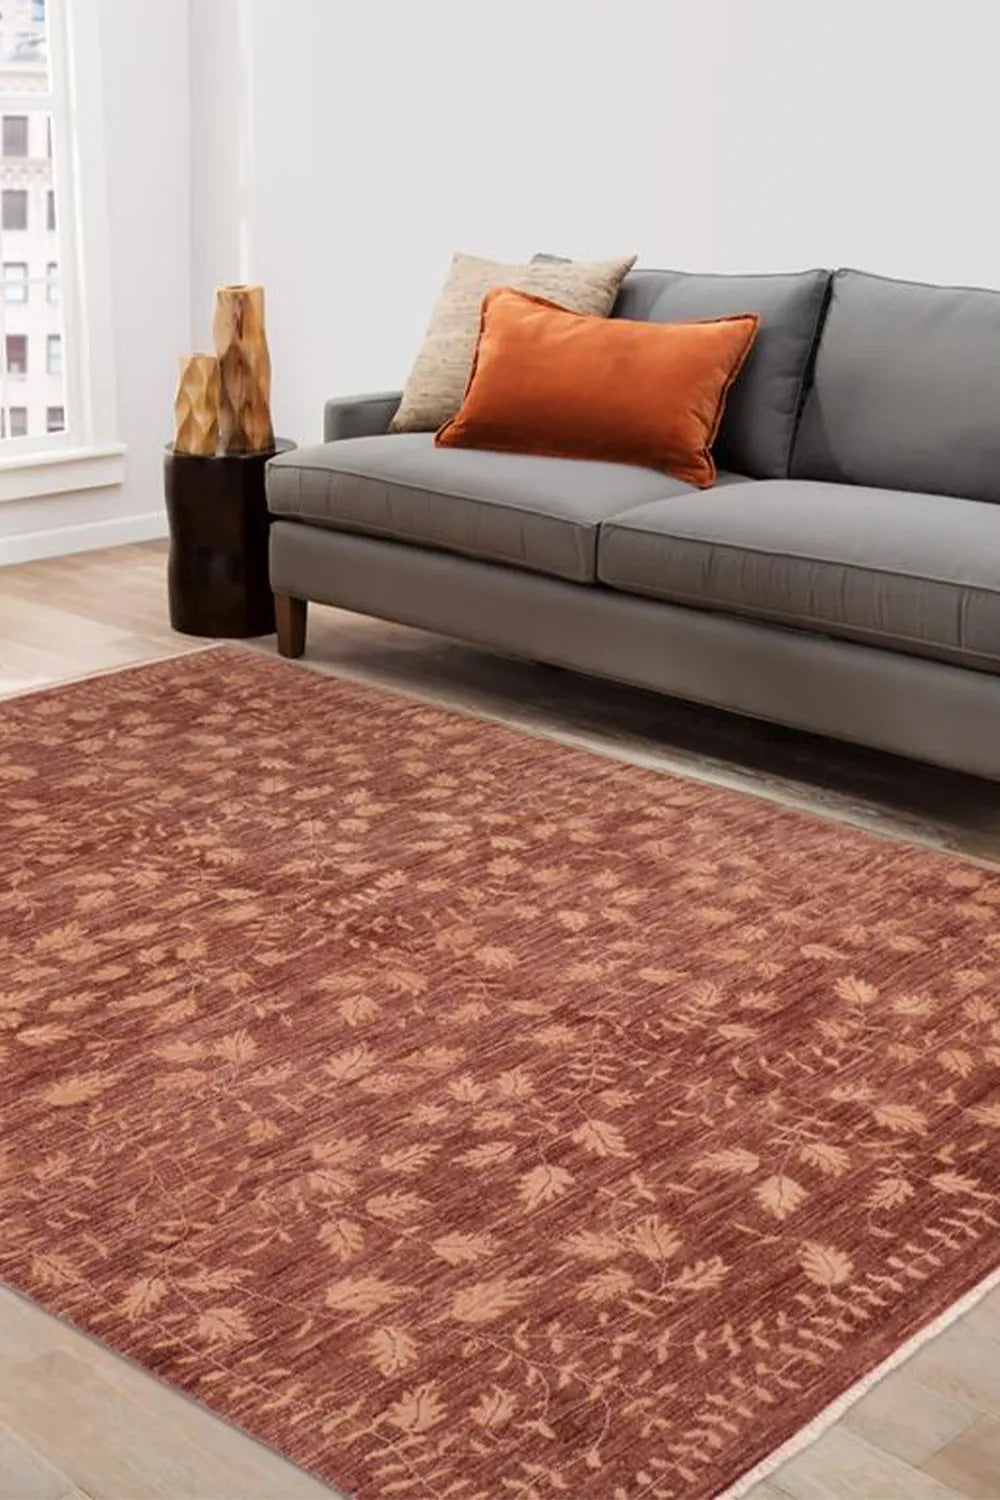 Low-pile brown wool rug, combining traditional techniques with modern style.